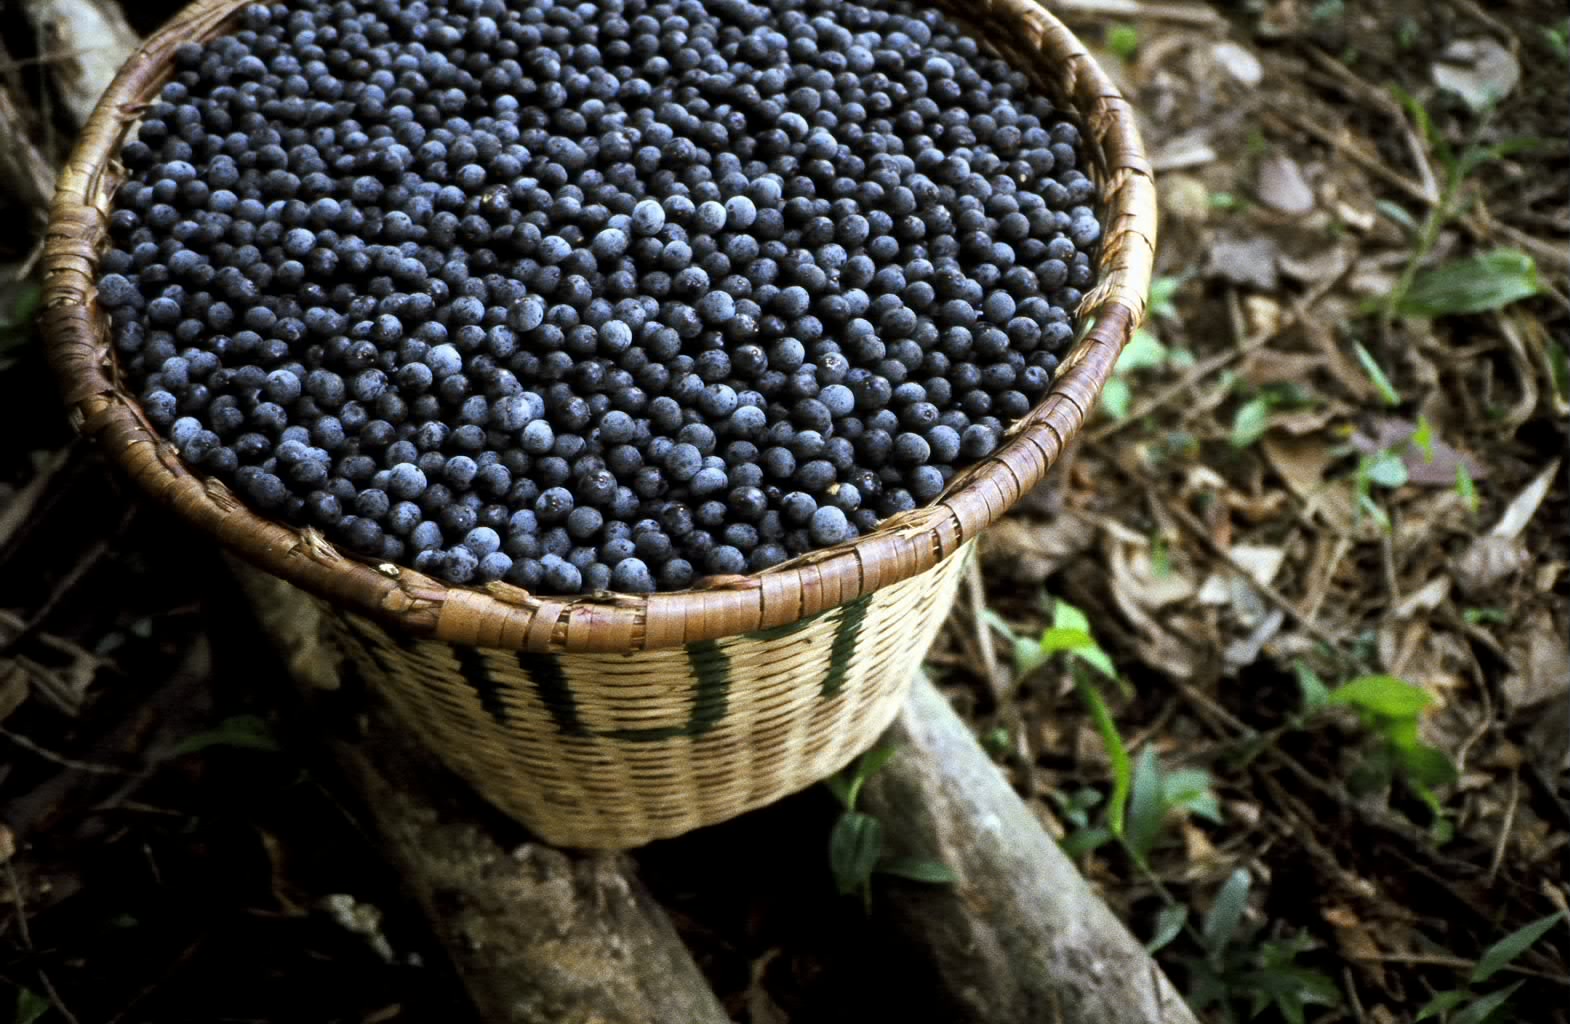 A kata of acai berries, which are known to have a high number of beneficial antioxidants (image copyright Tambor, Inc.)